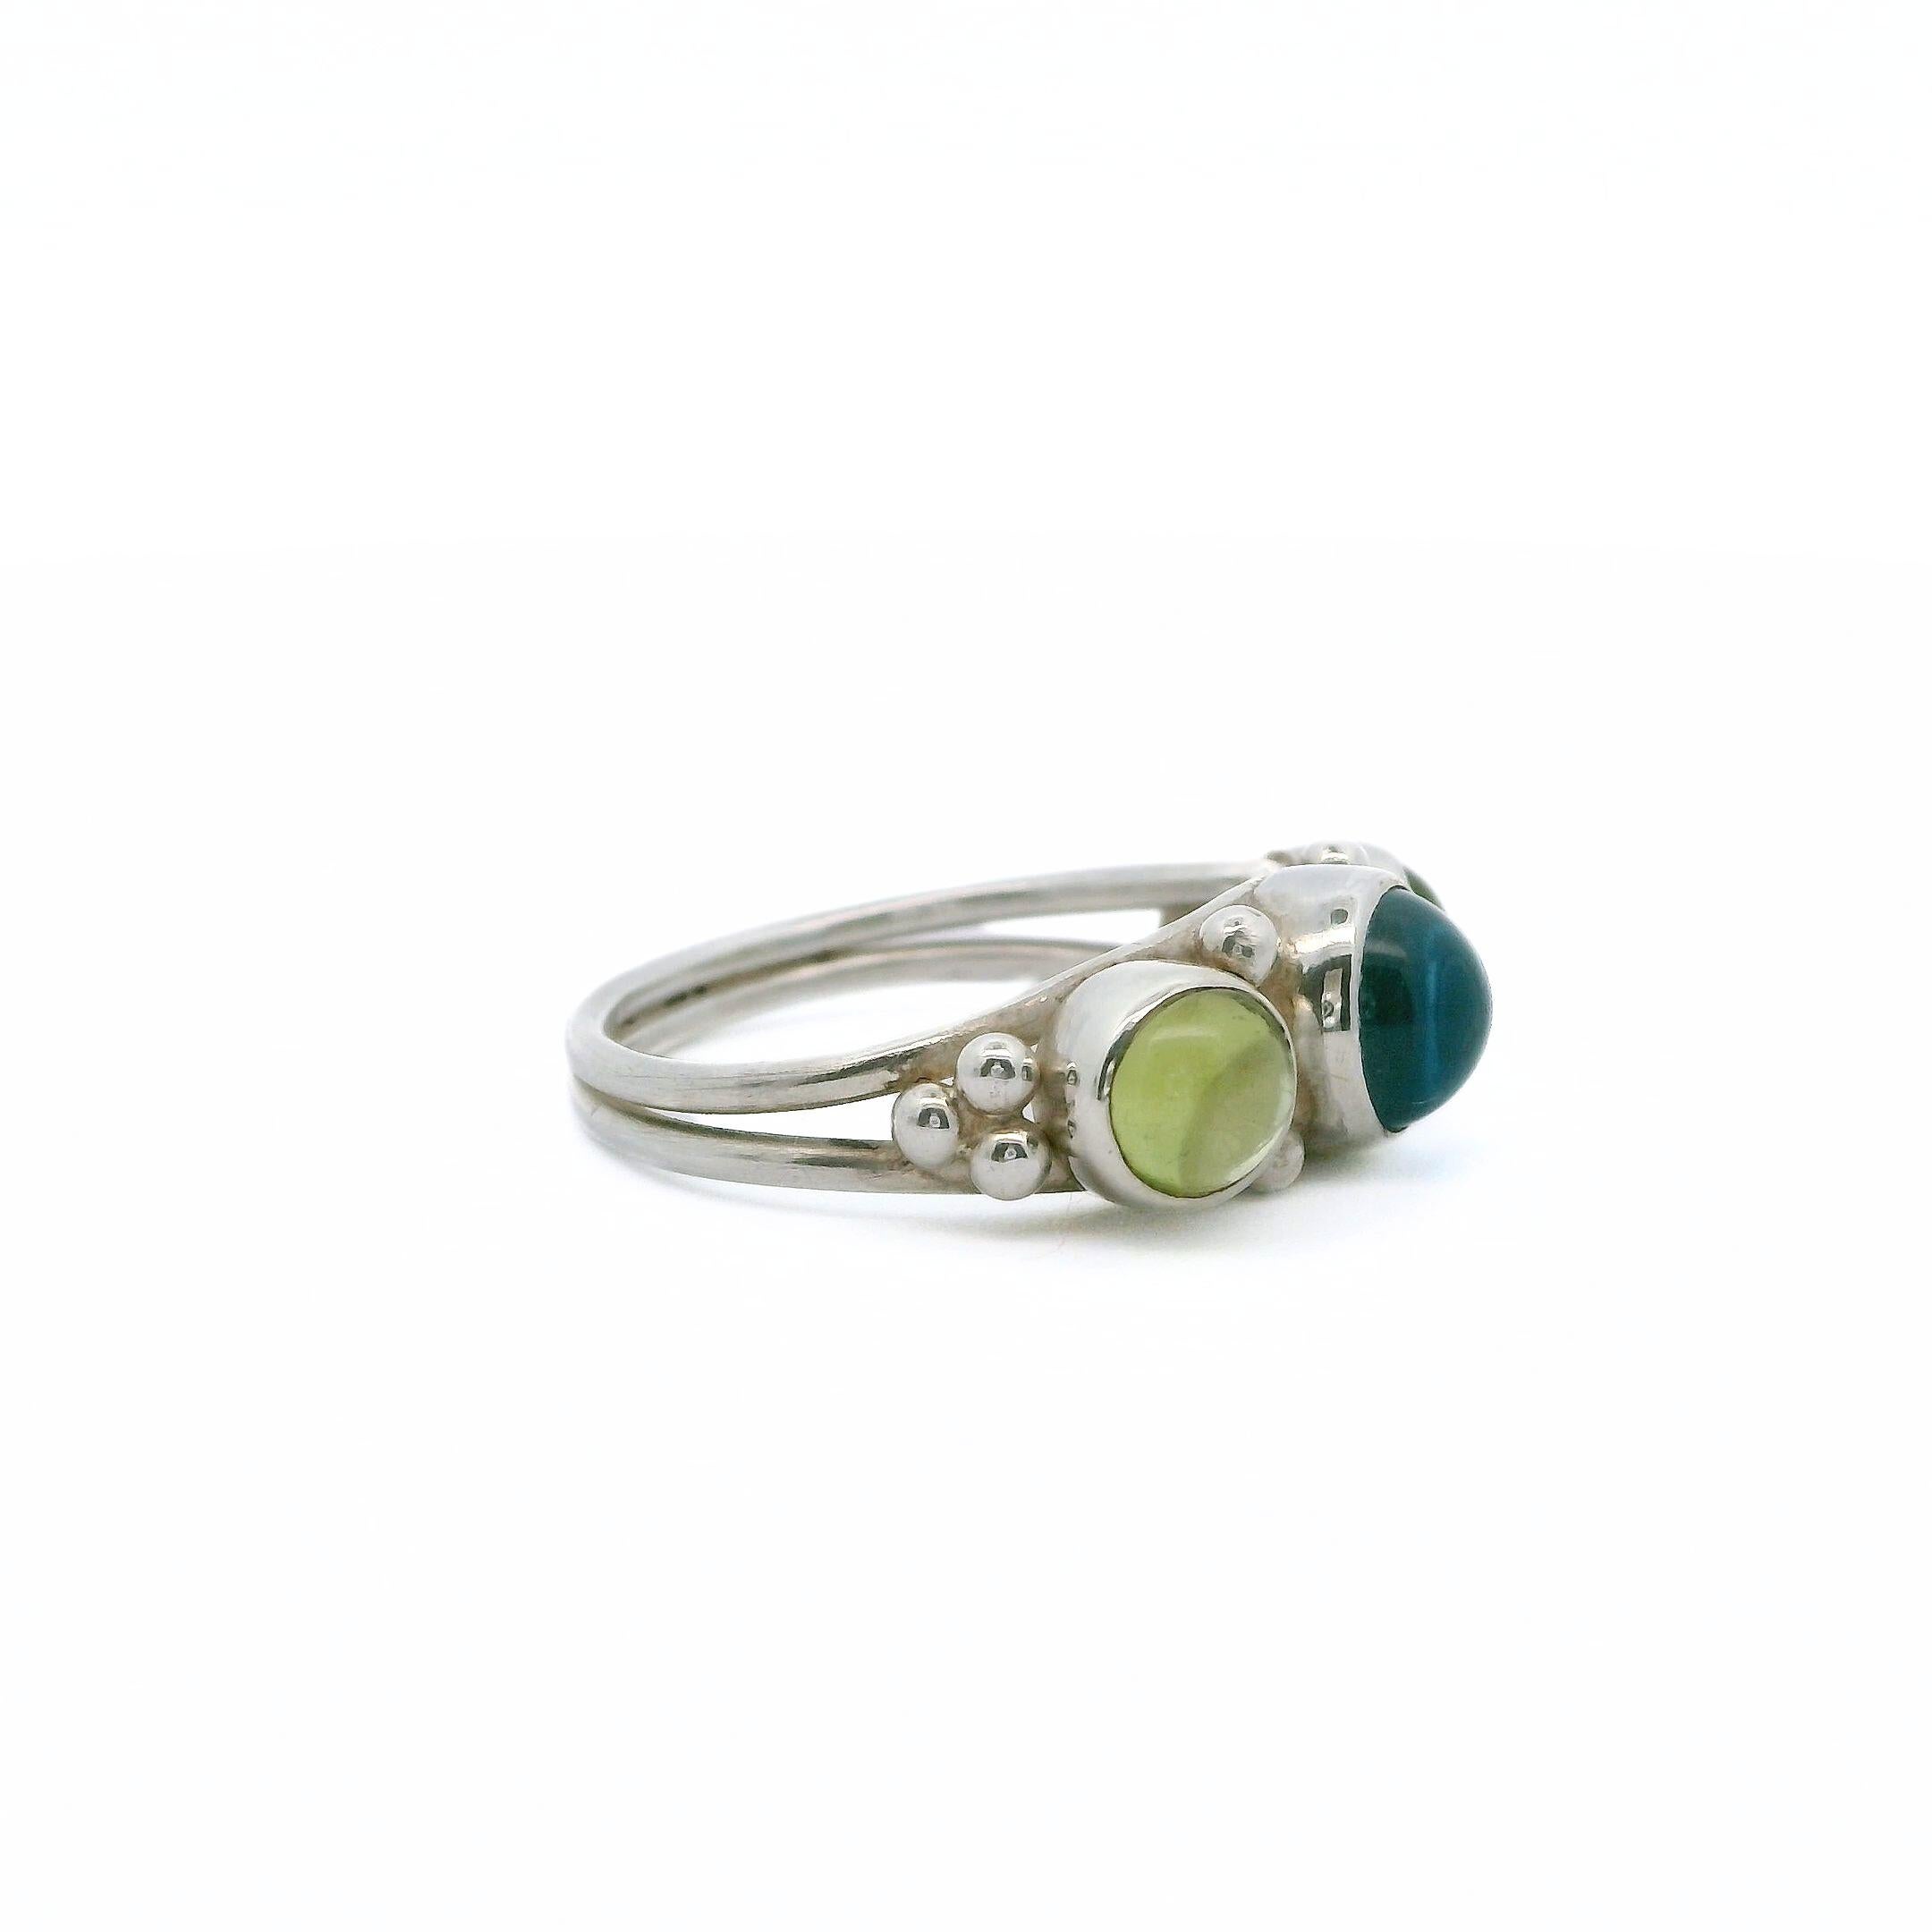 Cabochon Blue Topaz Peridot Silver 3-stone Cocktail Ring, Lynn Kathyrn Miller In New Condition For Sale In San Jose, CA